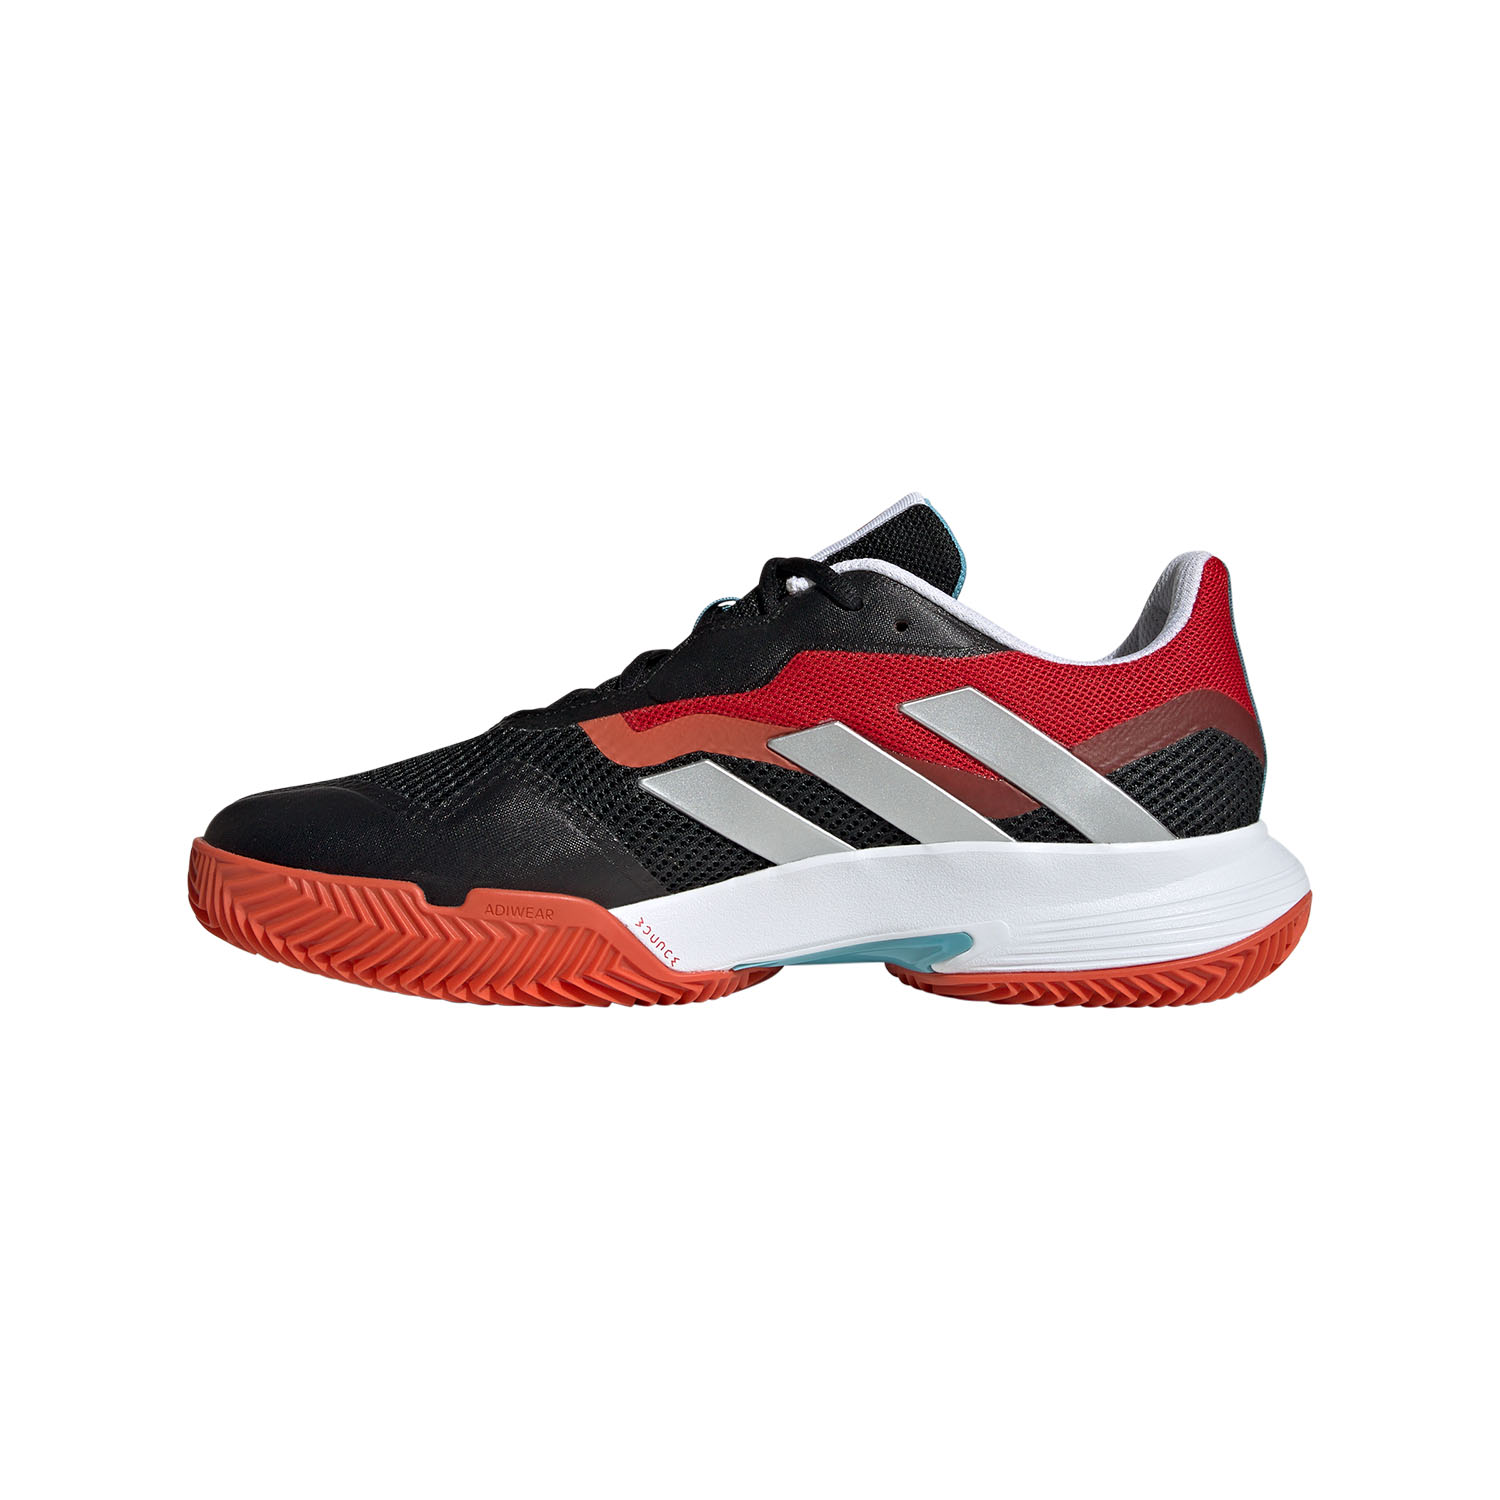 adidas CourtJam Control Clay - Core Black/Ftwr White/Better Scarlet